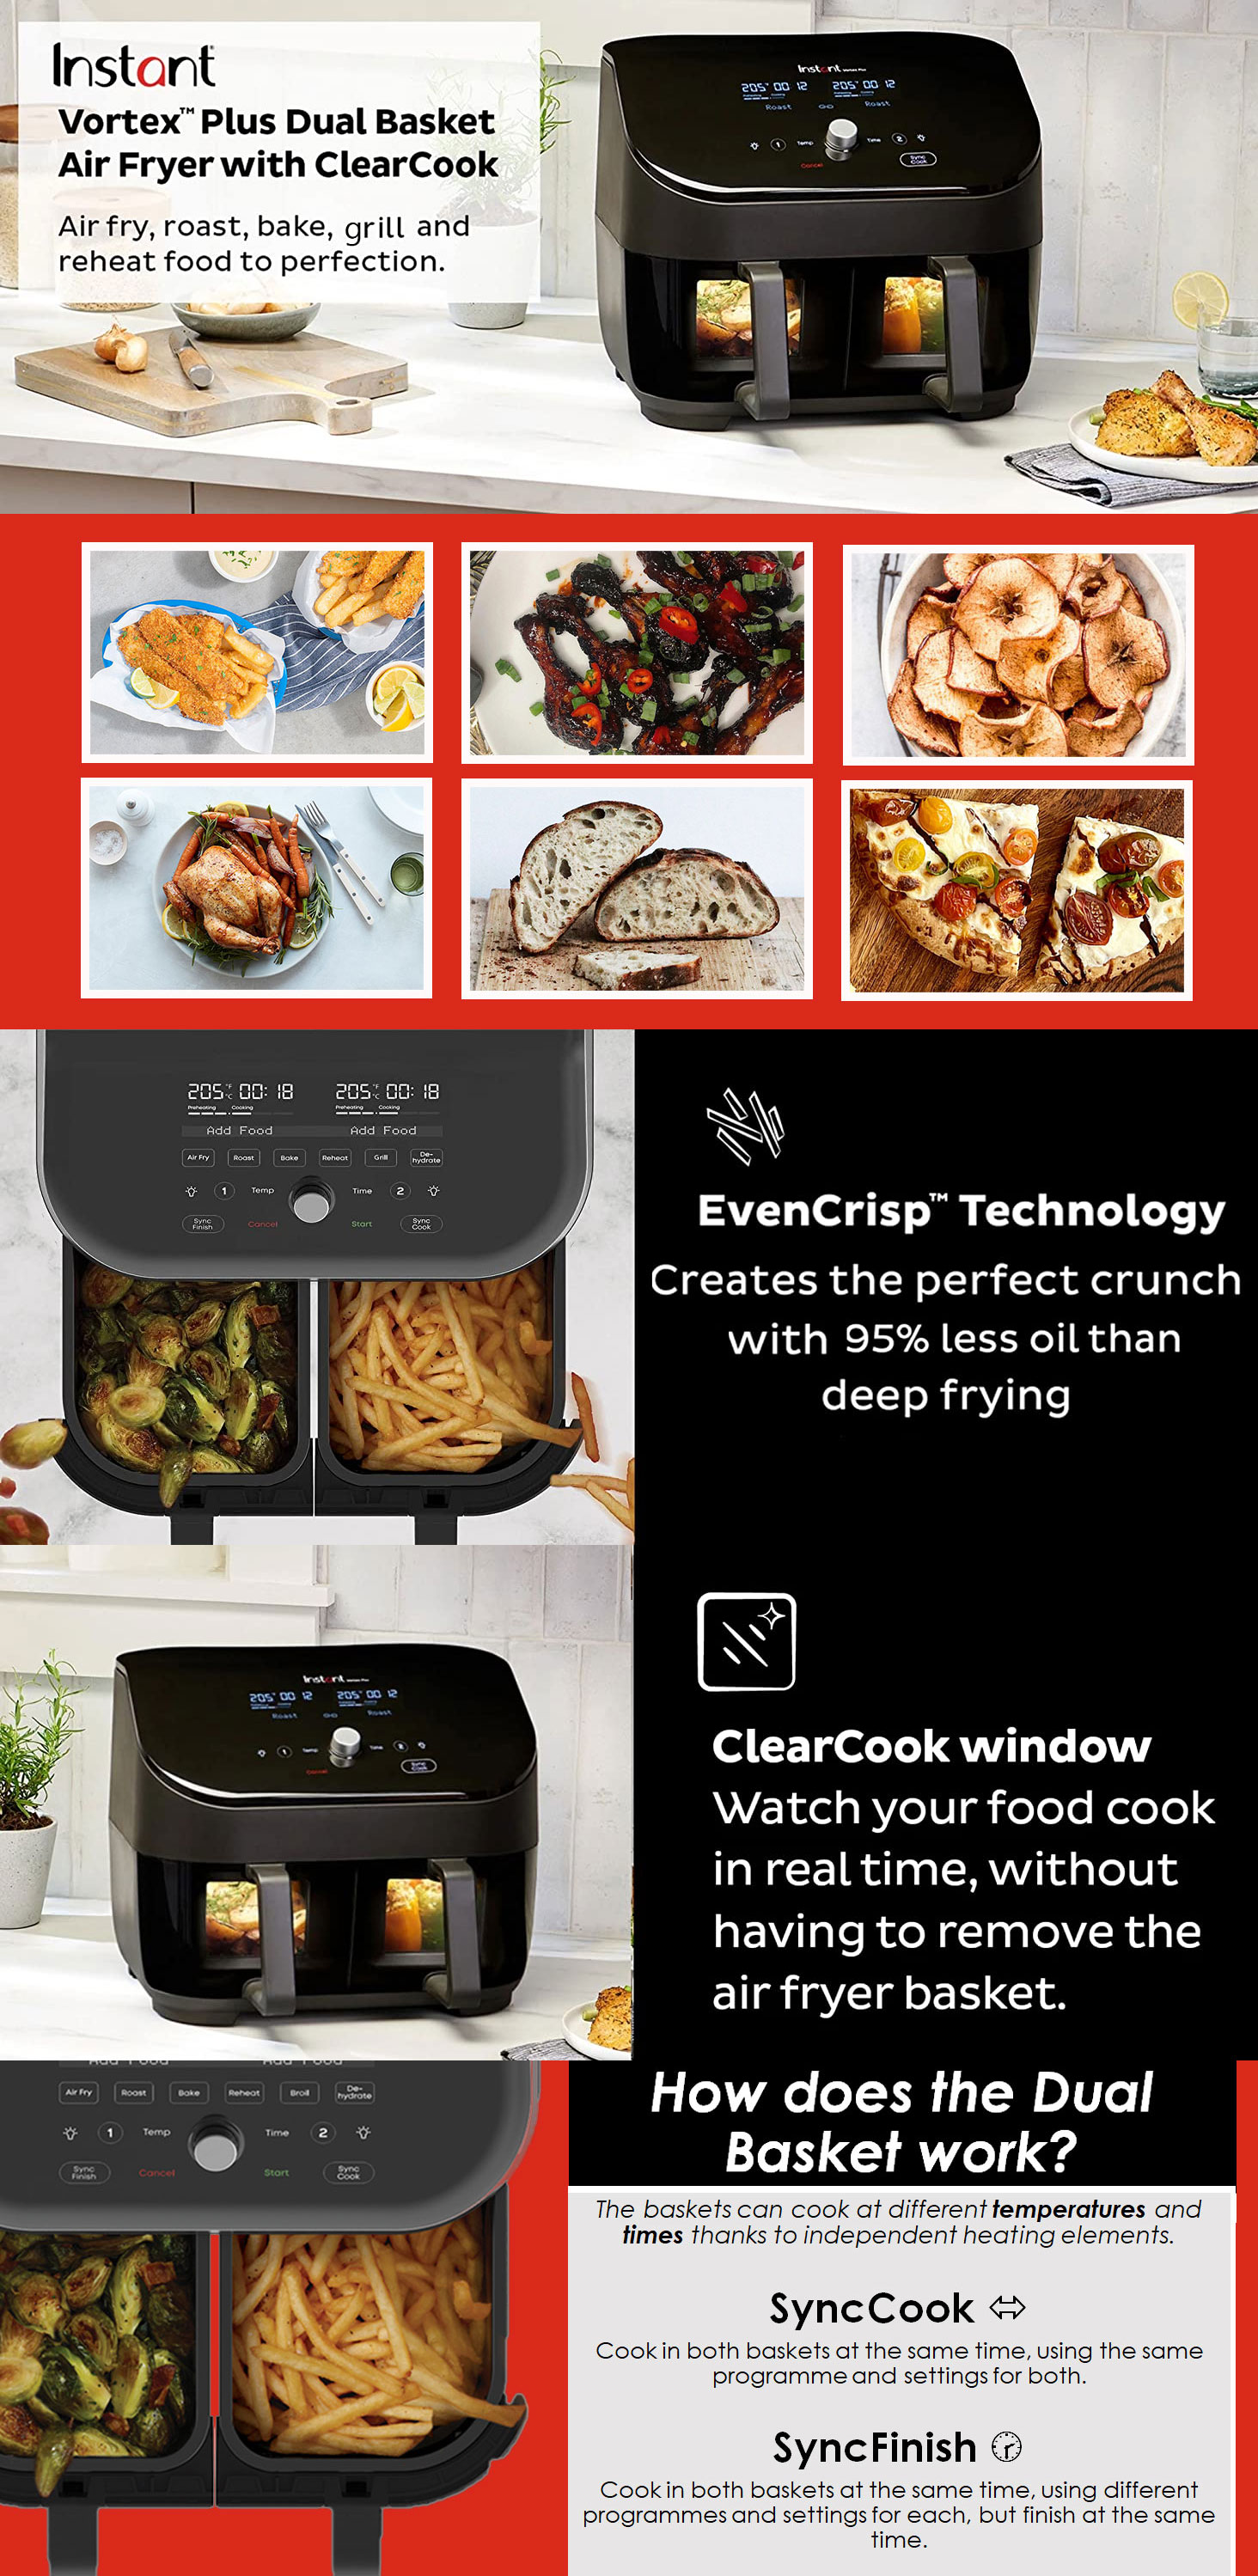 Instant Vortex Plus Dual Basket with Clearcook - 7.6l Digital Health Air Fryer, Black, 8-in-1 Smart Programs - Air Fry, Bake, Roast, Grill, Dehydrate, Reheat, Xl Capacity -1700w INST-140311001 - Skroutz Κύπρος - Skroutz.com.cy